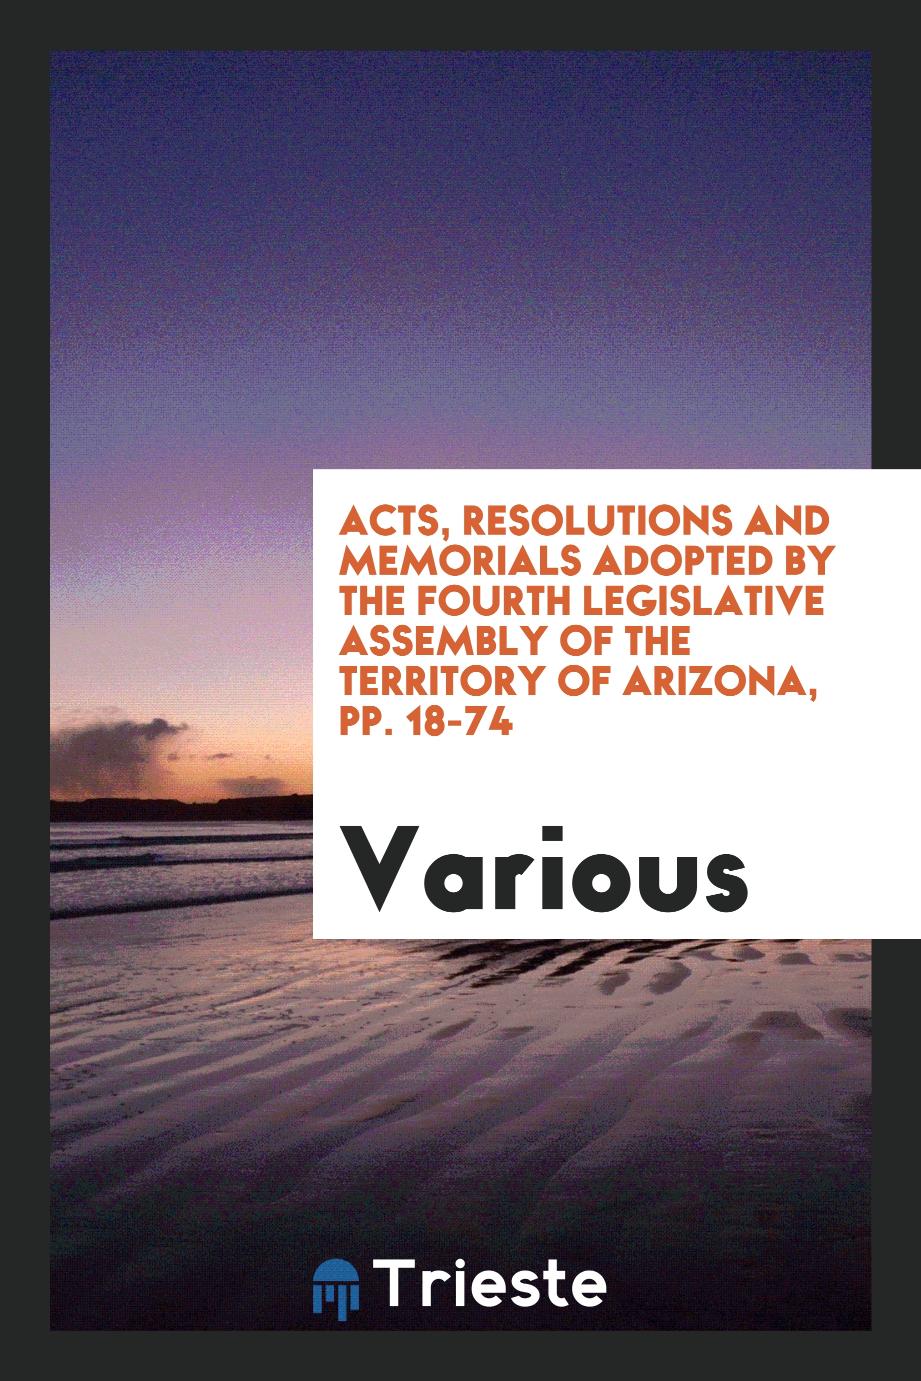 Acts, Resolutions and Memorials Adopted by the Fourth Legislative Assembly of the Territory of Arizona, pp. 18-74